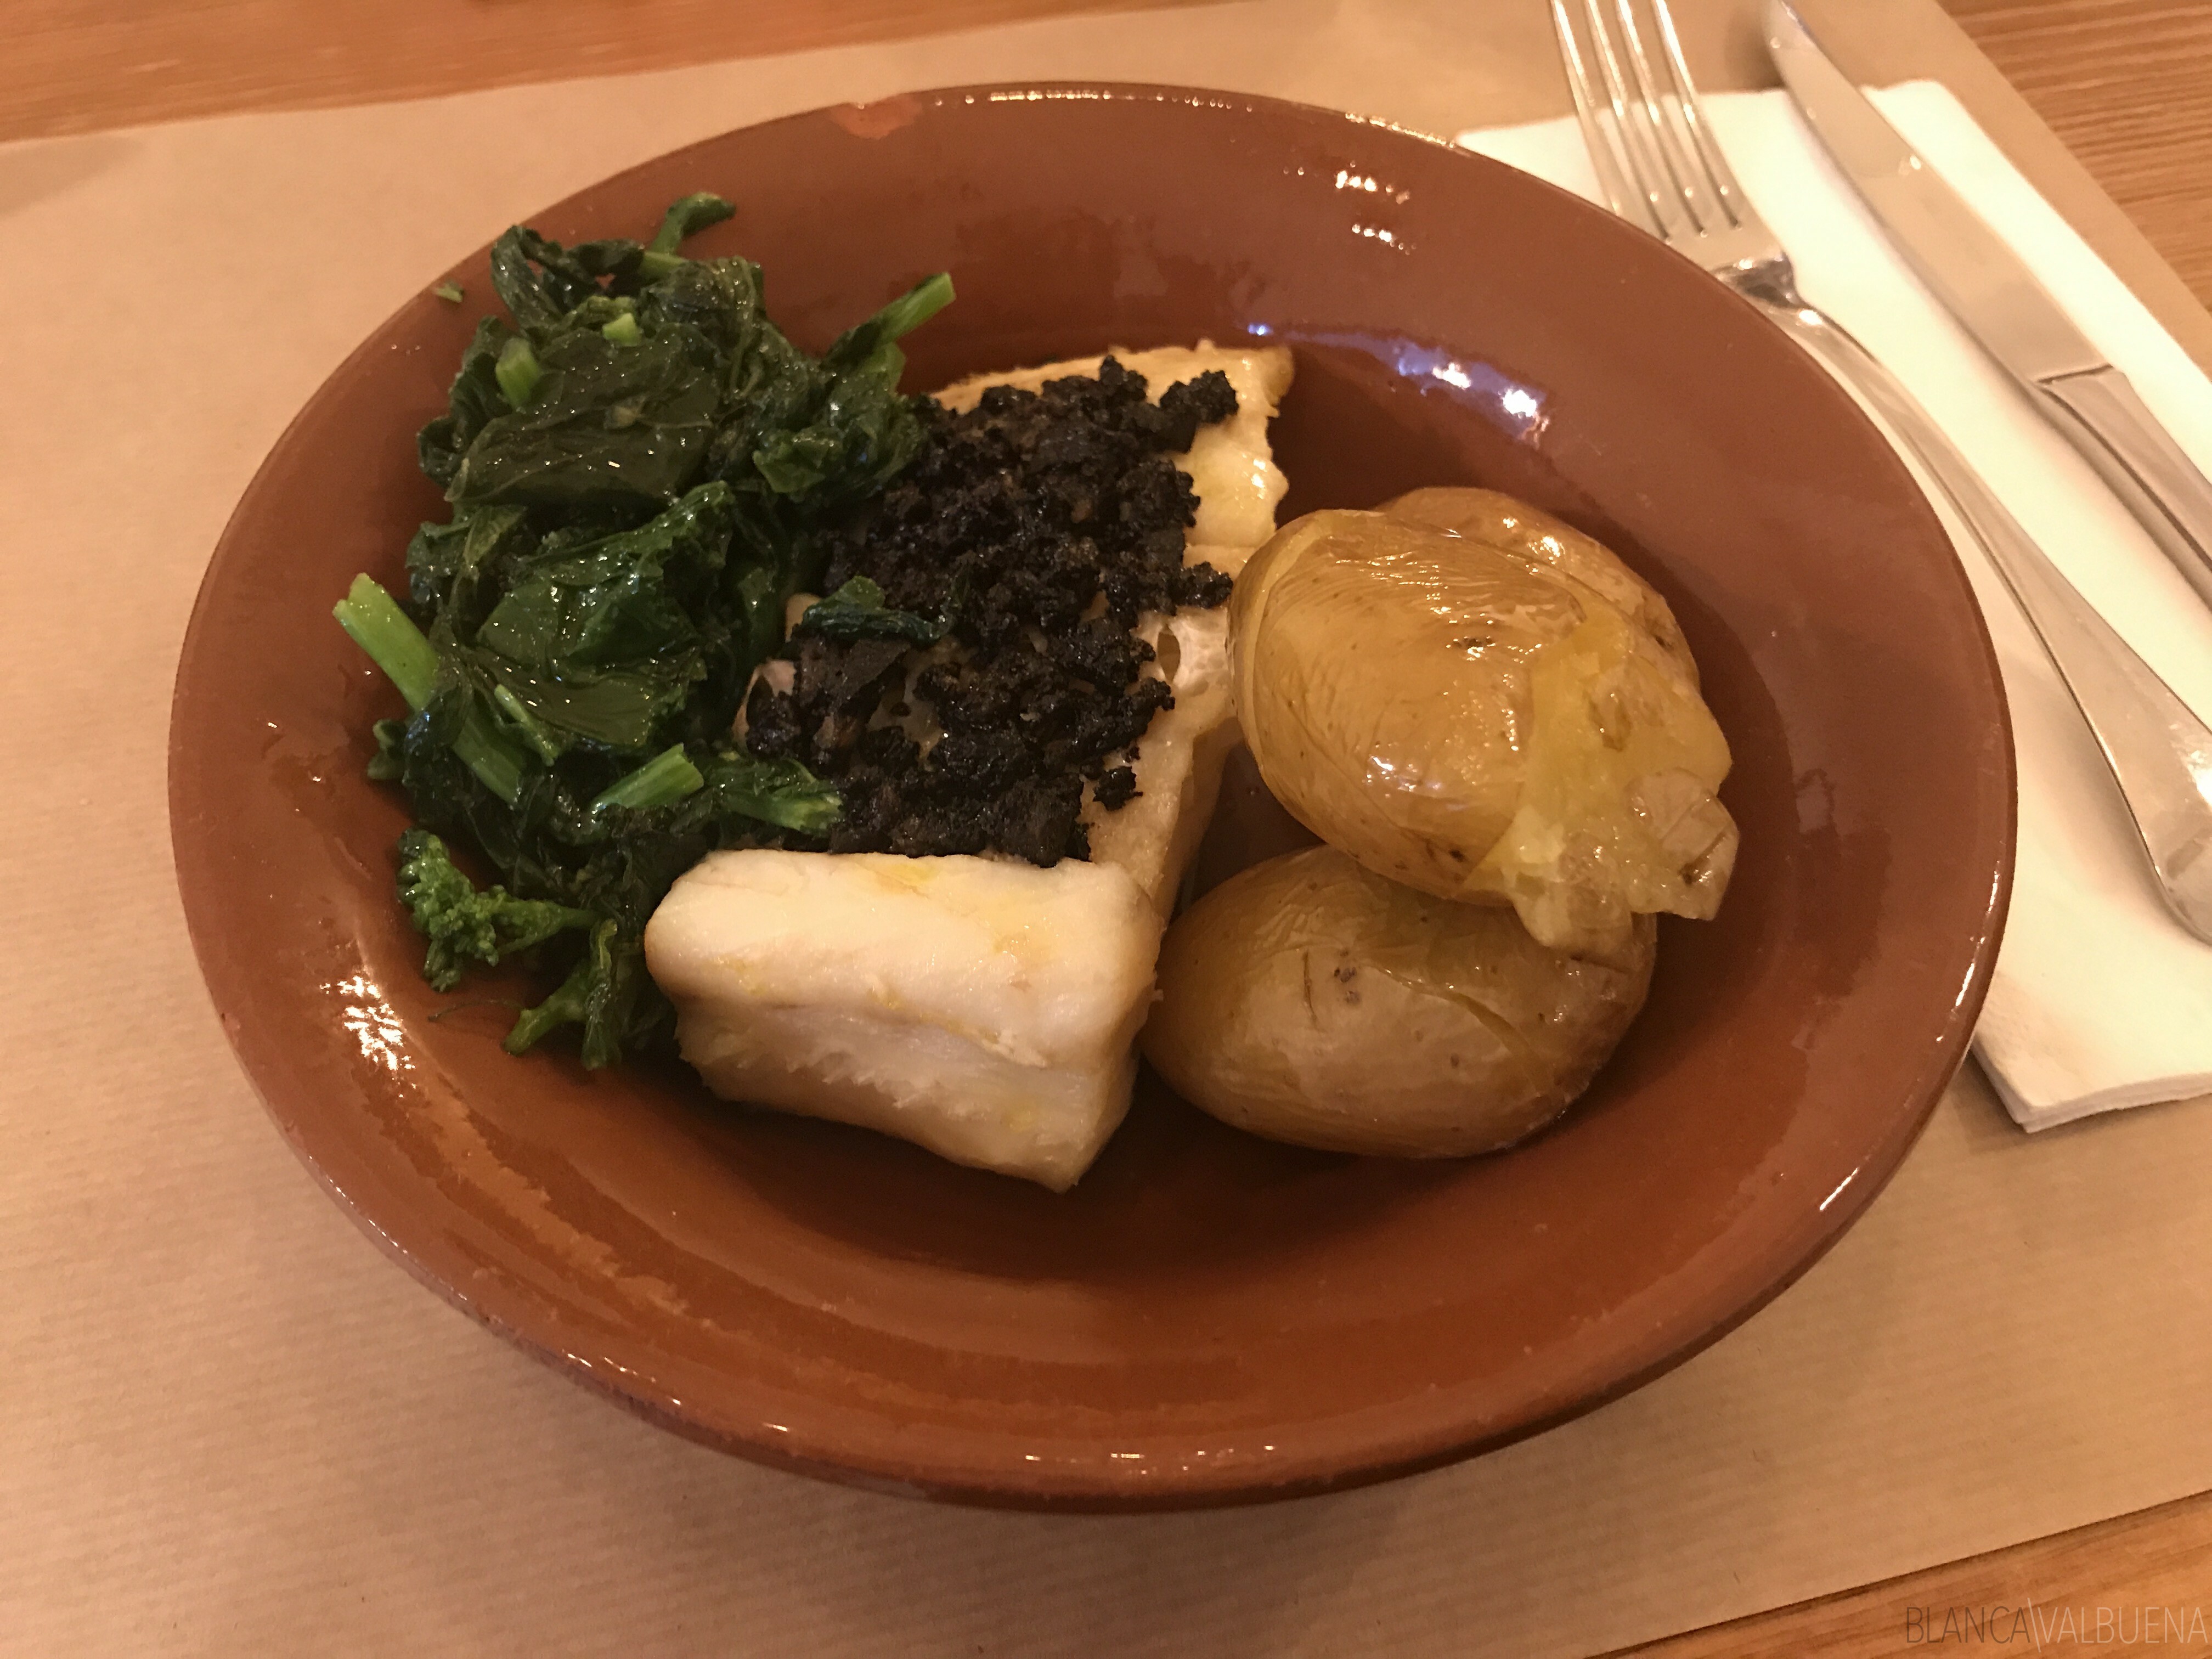 A modern take on Portuguese food can be found at Expressoes in Saldanha